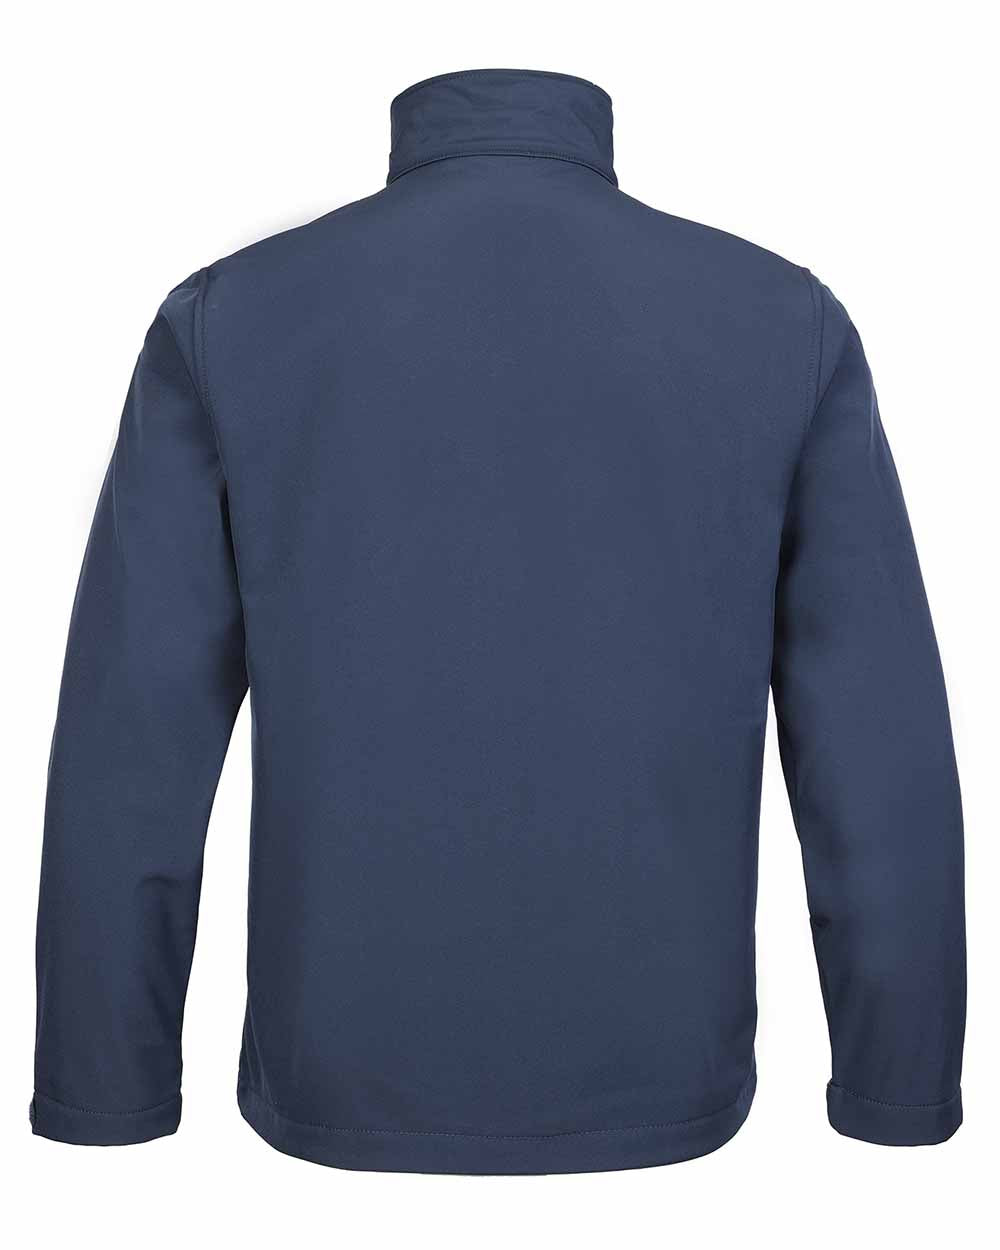 Navy Blue coloured Fort Selkirk Softshell Waterproof Jacket on white background 